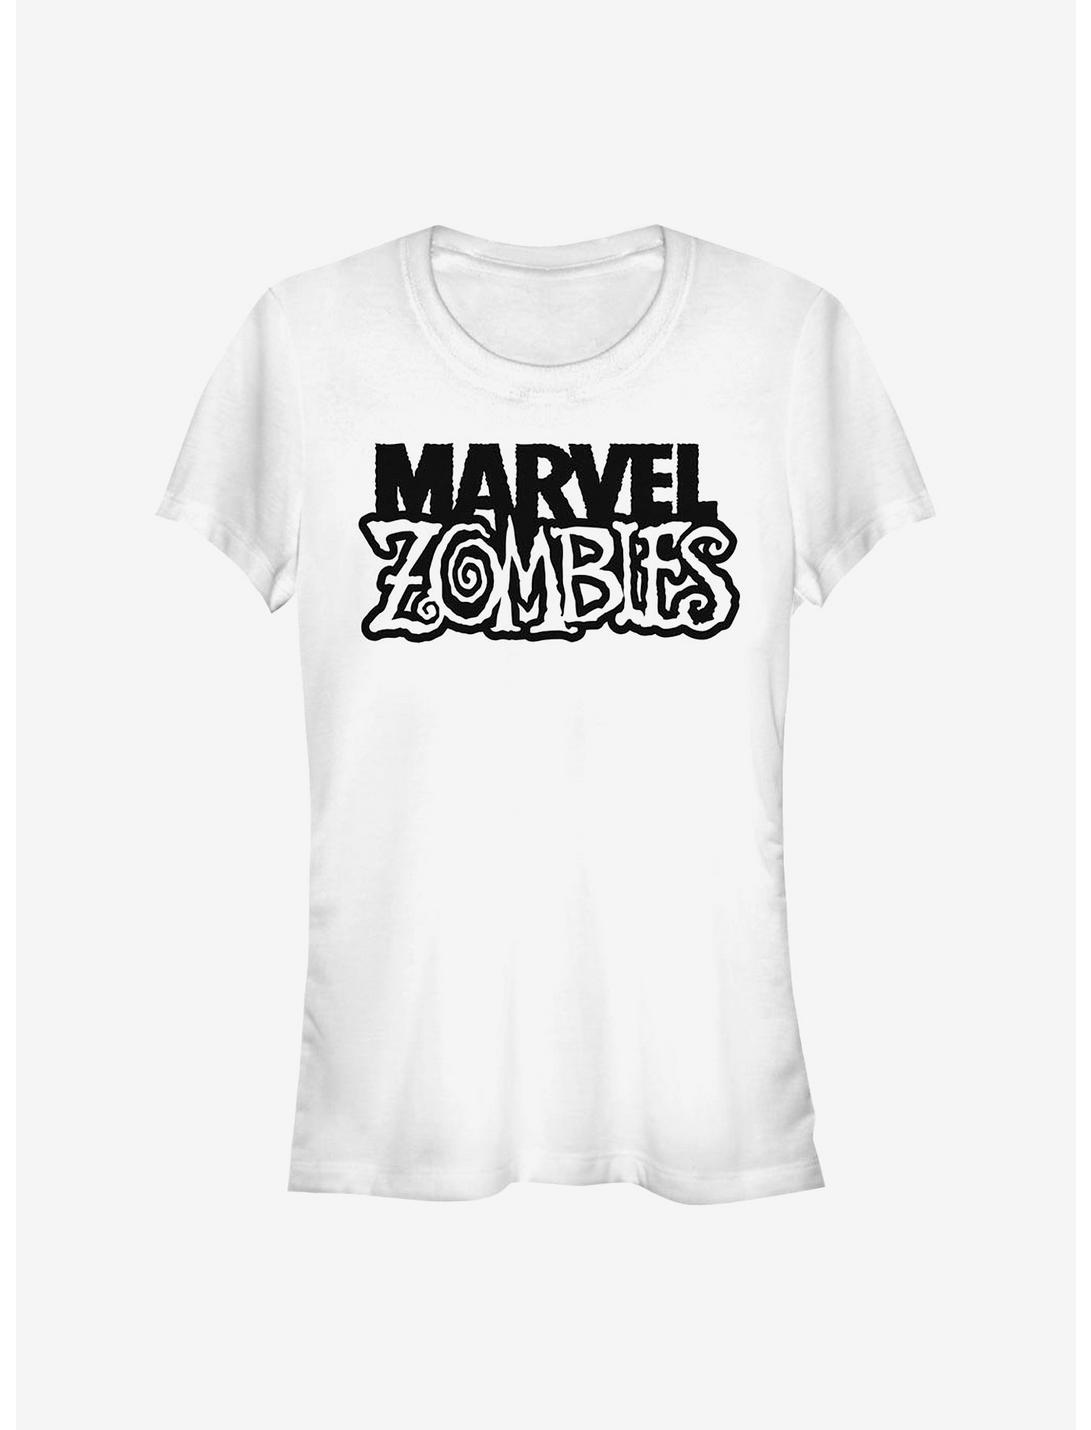 Marvel Zombies Zombies Of Marvel Logo Girls T-Shirt, WHITE, hi-res